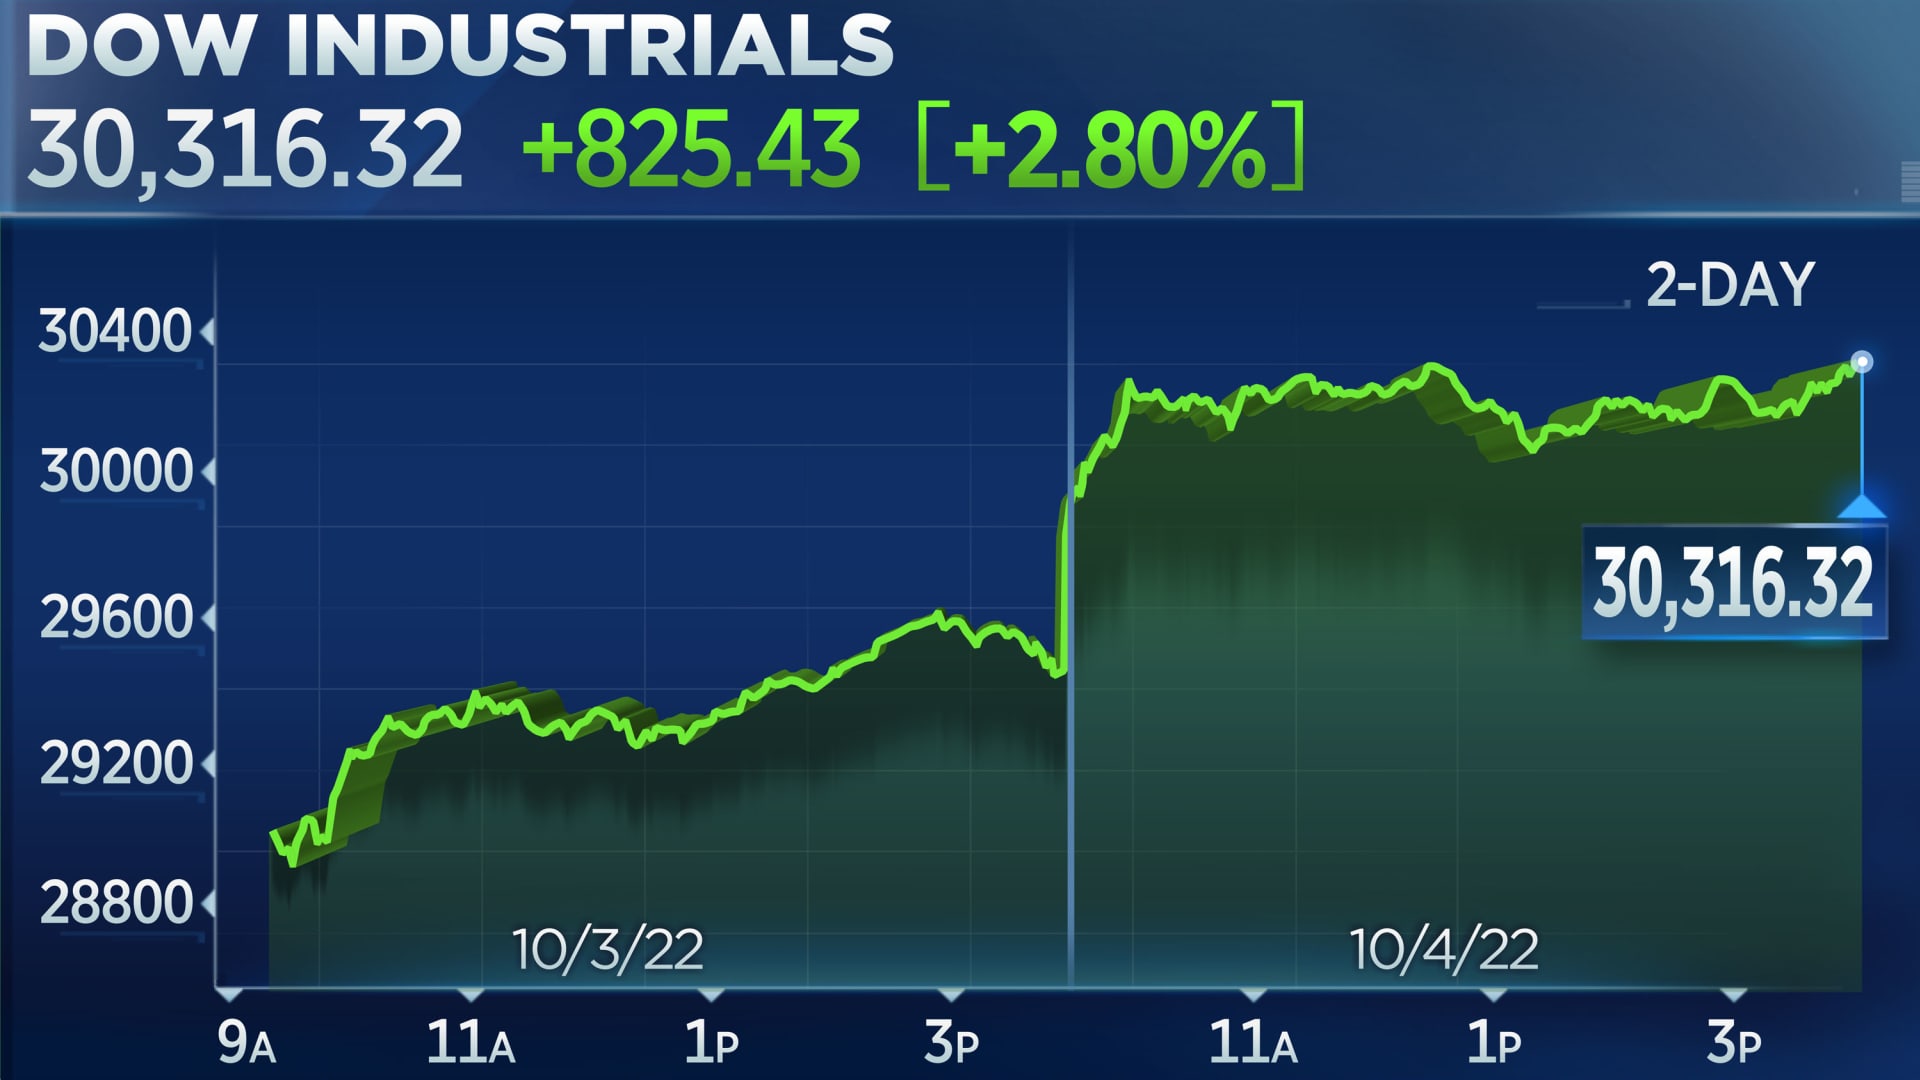 Dow rallies more than 1,500 points in two days, S&P 500 posts best 2-day gain since 2020